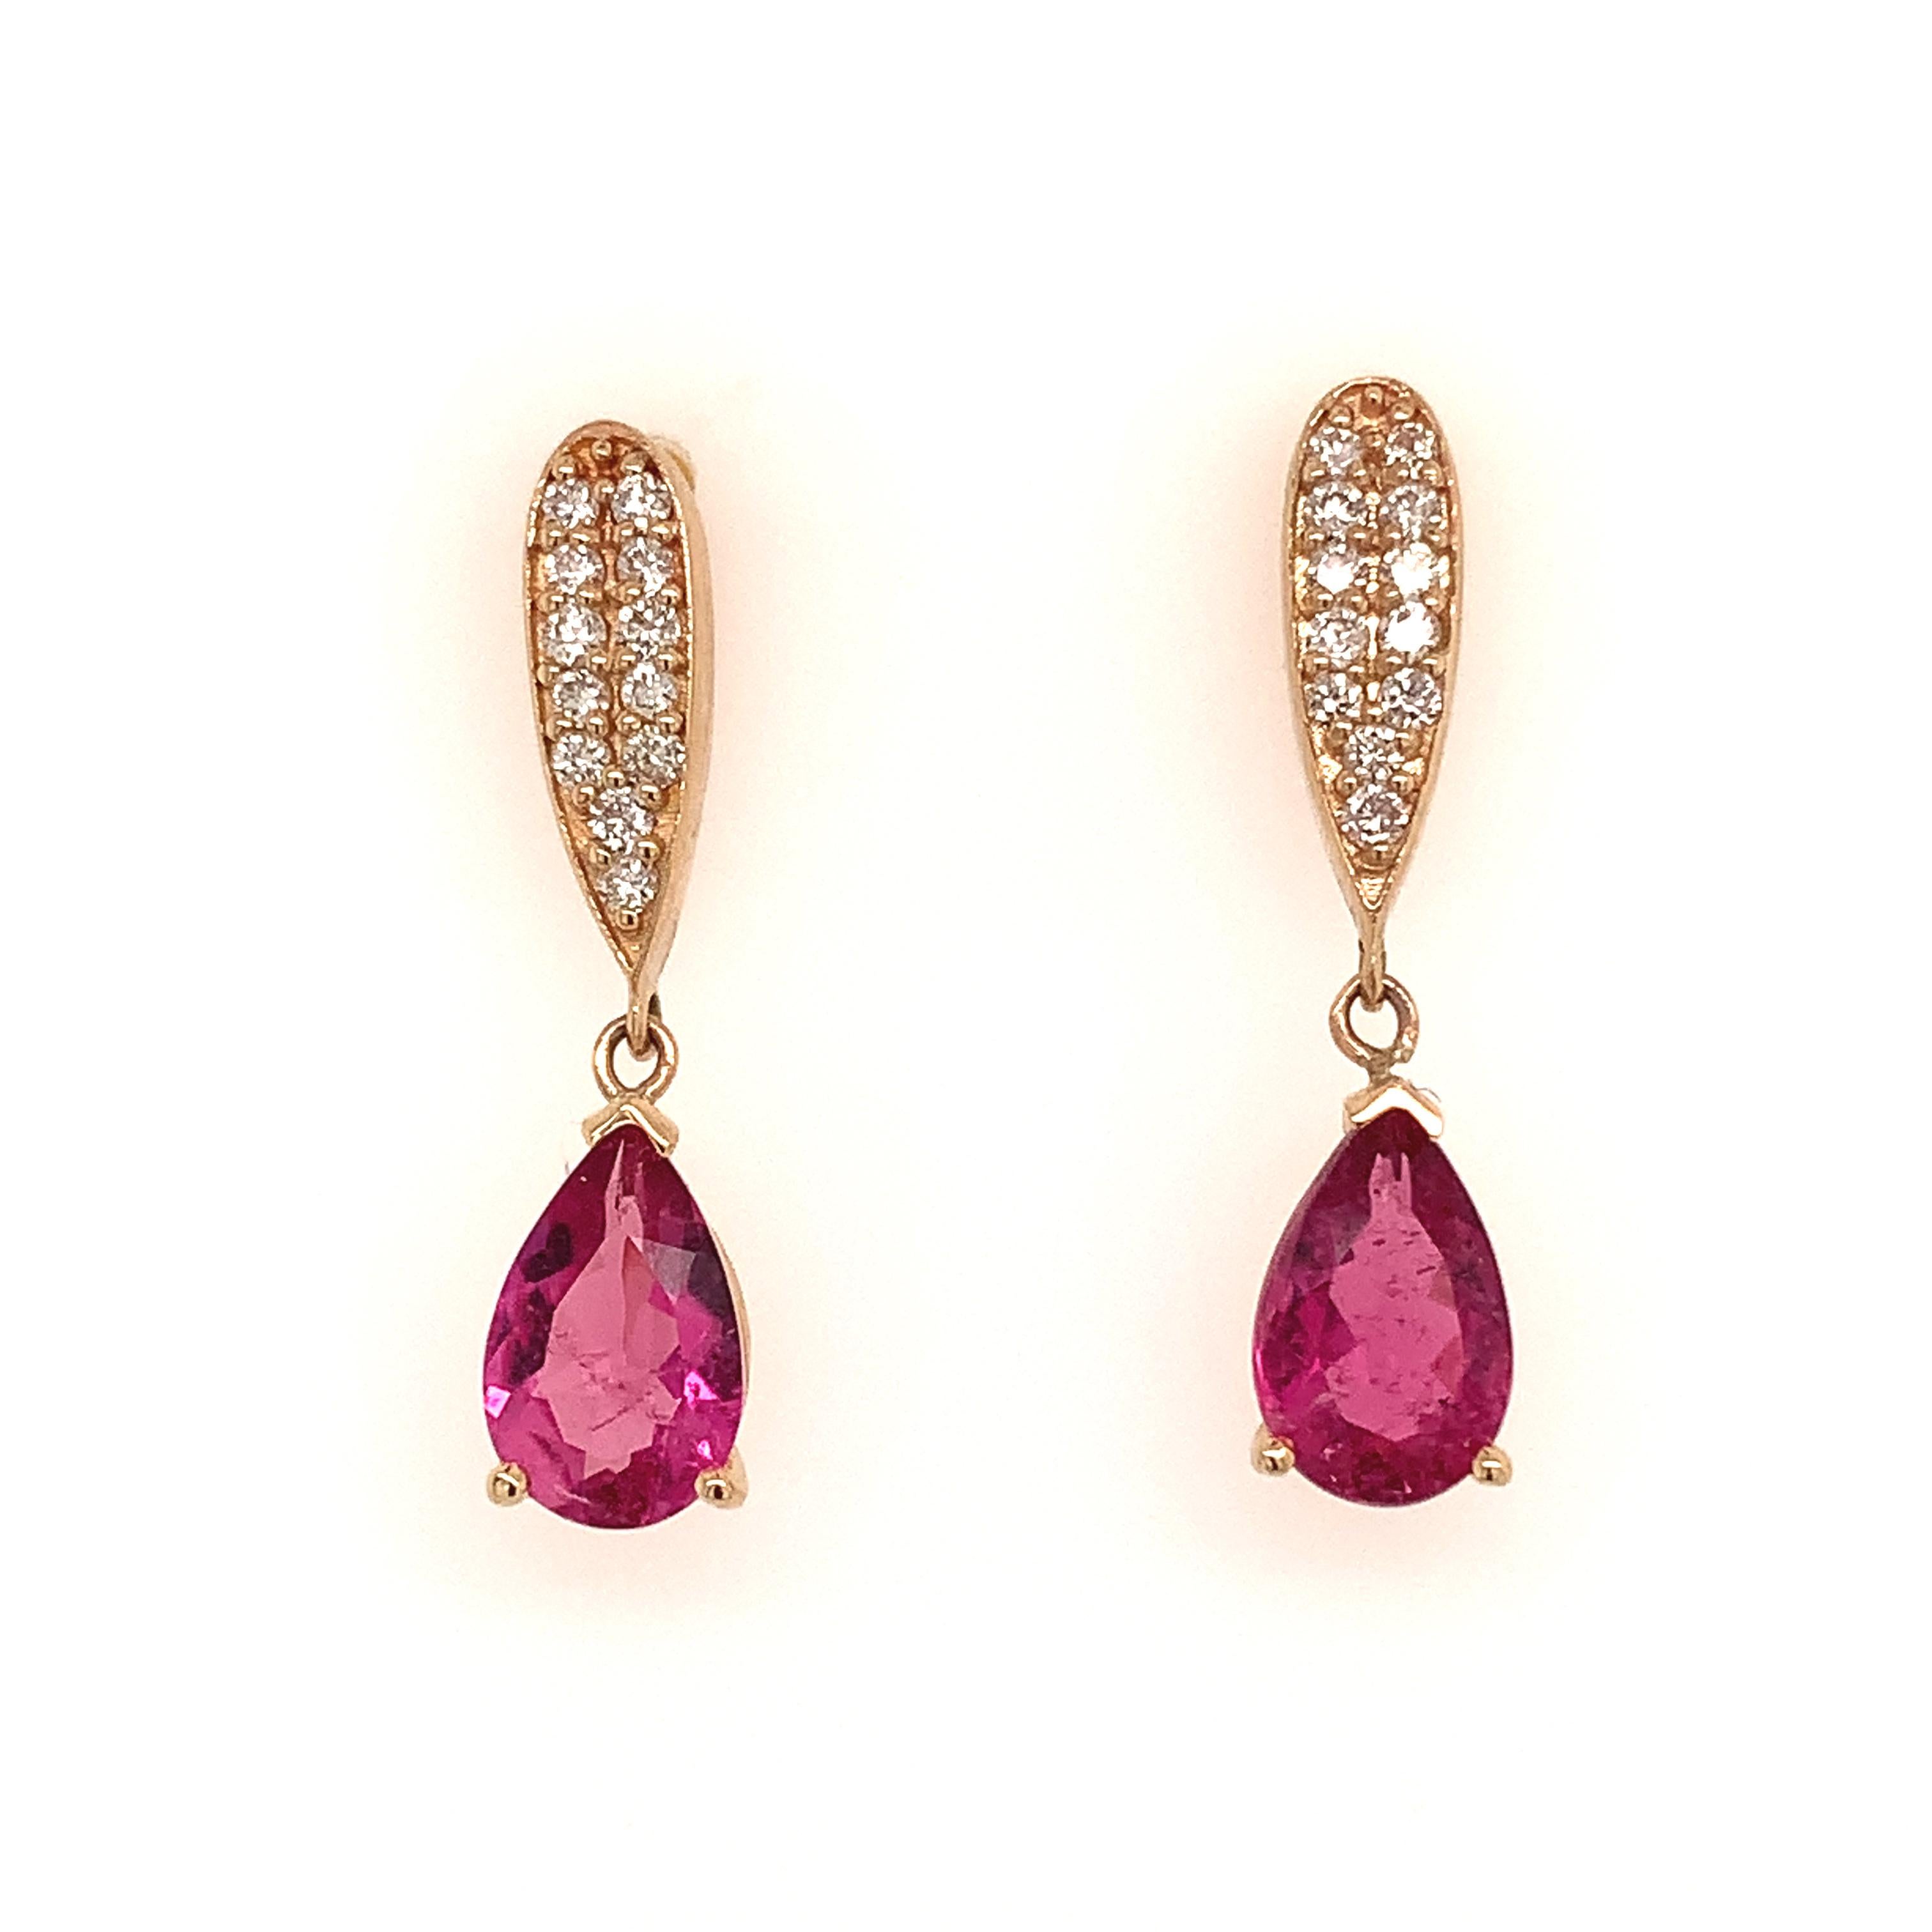 Natural Tourmaline Rubellite Diamond Earrings 14k Gold 1.60 TCW Certified For Sale 3